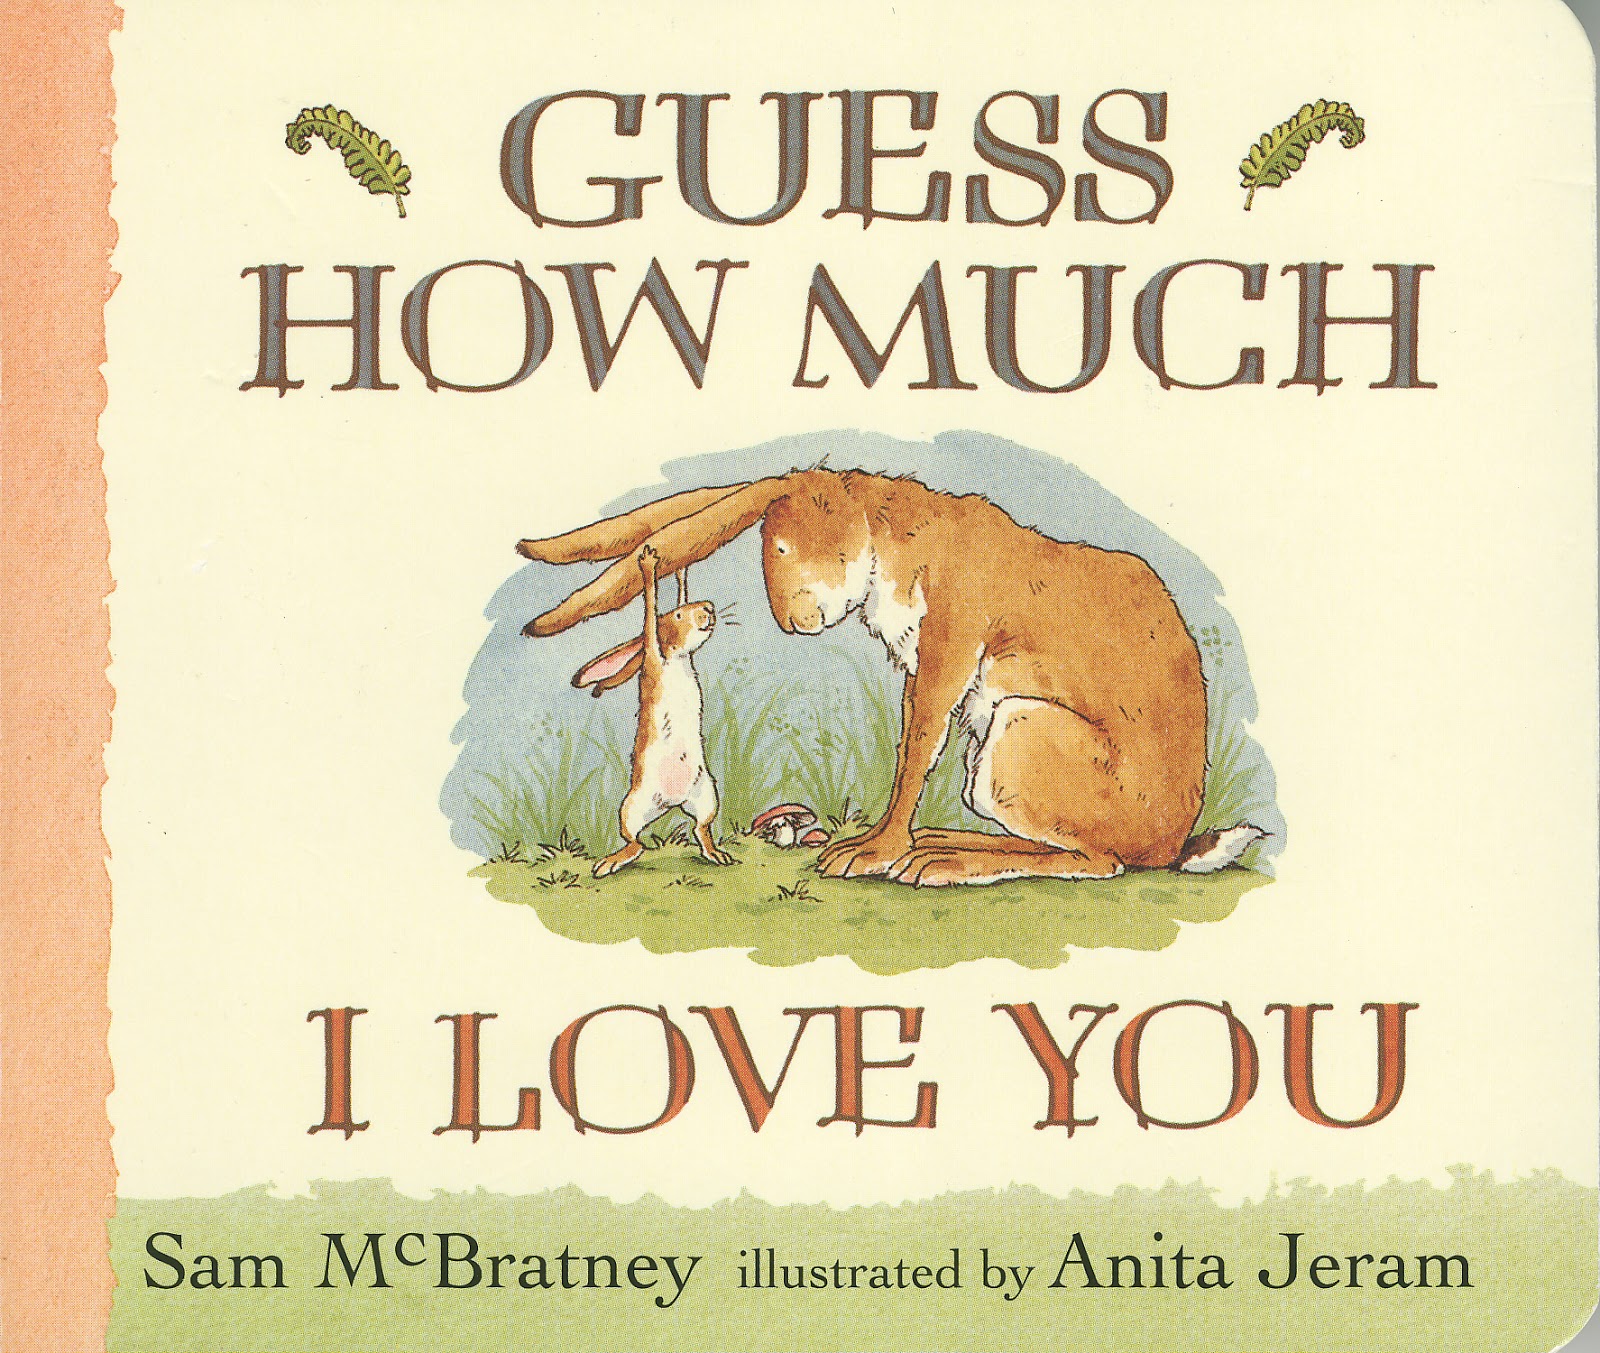 Guess How Much I Love You Quotes. QuotesGram